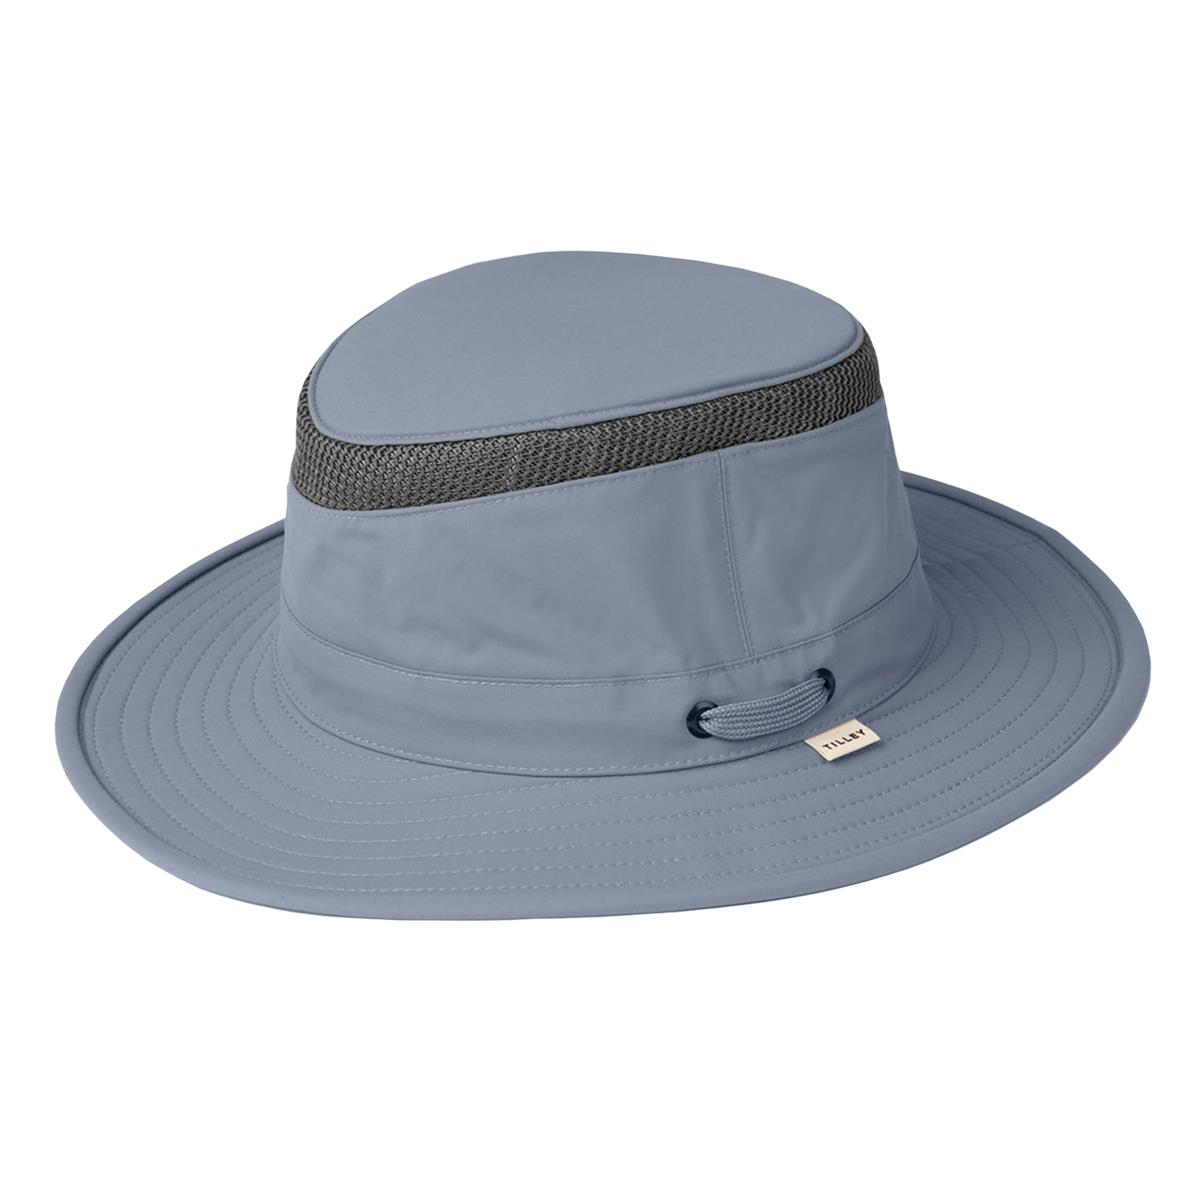 What is the guarantee for the Tilley LTM5 hat?